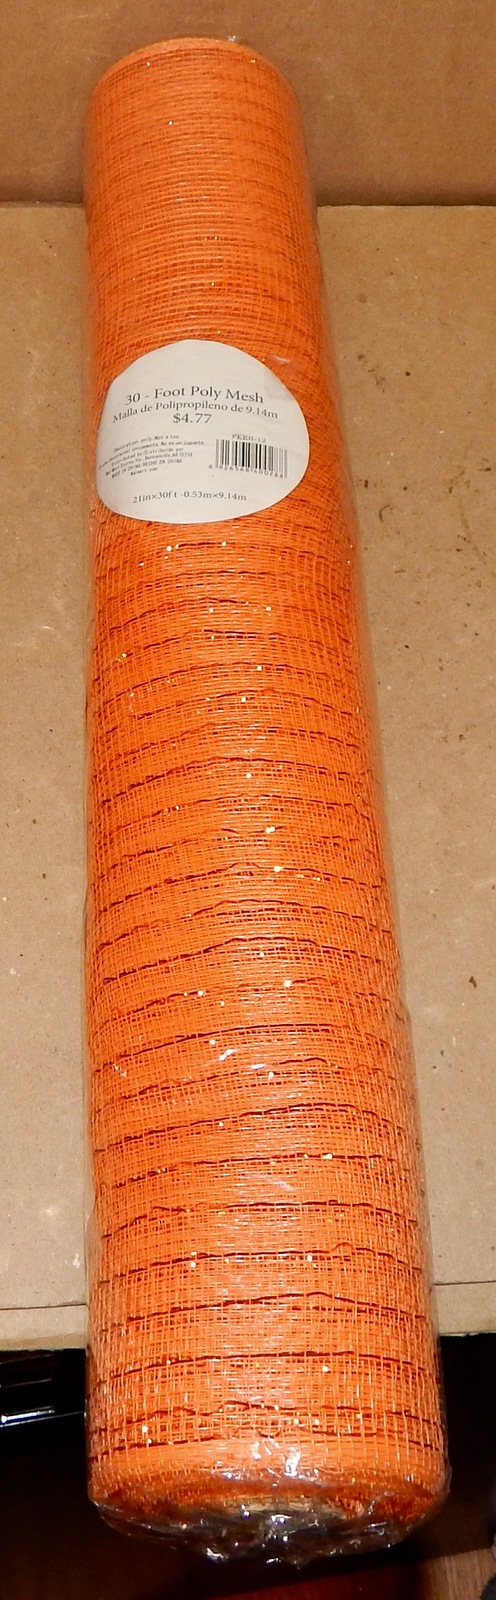 Mesh Rolls Crafts Wreaths Many Colors You Choose Celebrate It 21" Wide 178V-4 - $4.57